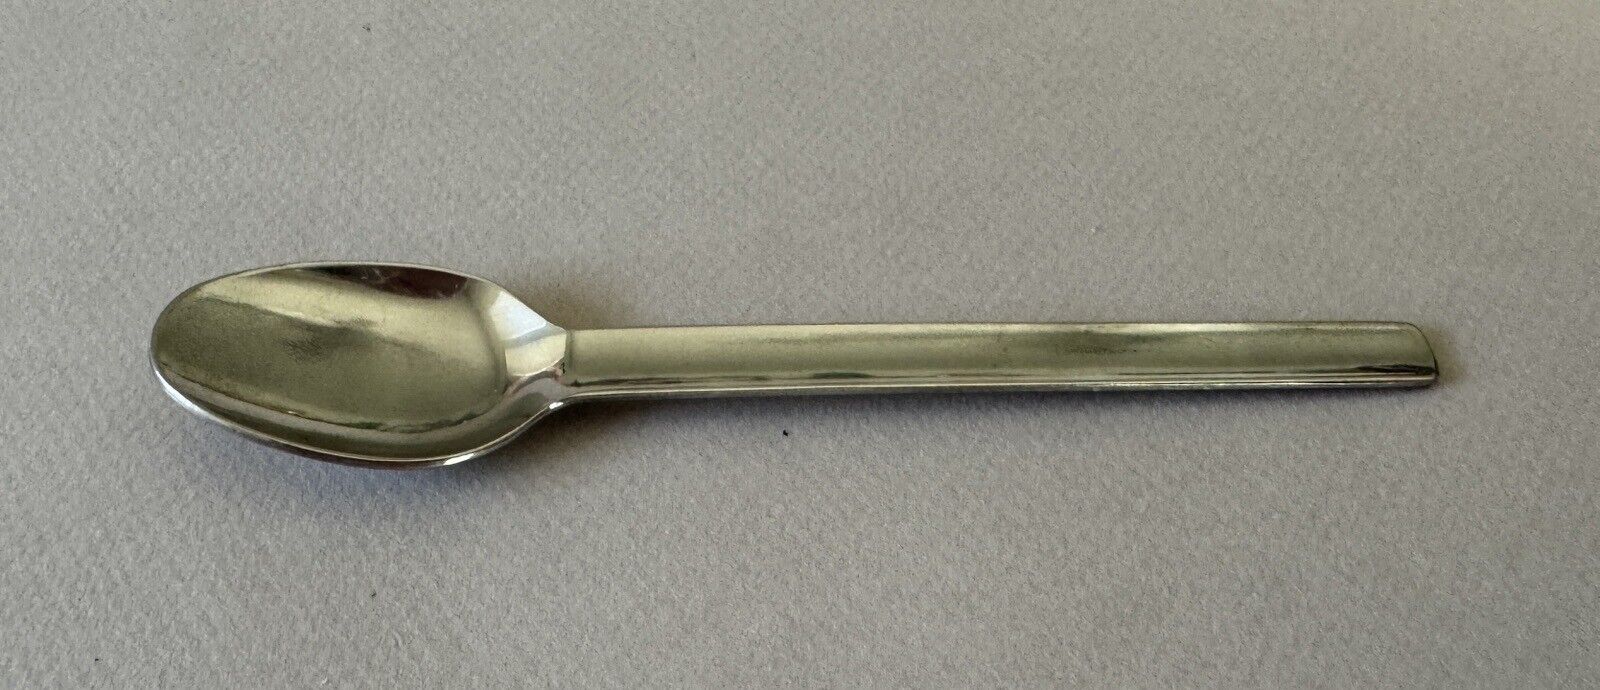 Mod ALITALIA Airlines ITALY PINTI INOX 5 5/8 in. Stainless Steel SPOON 